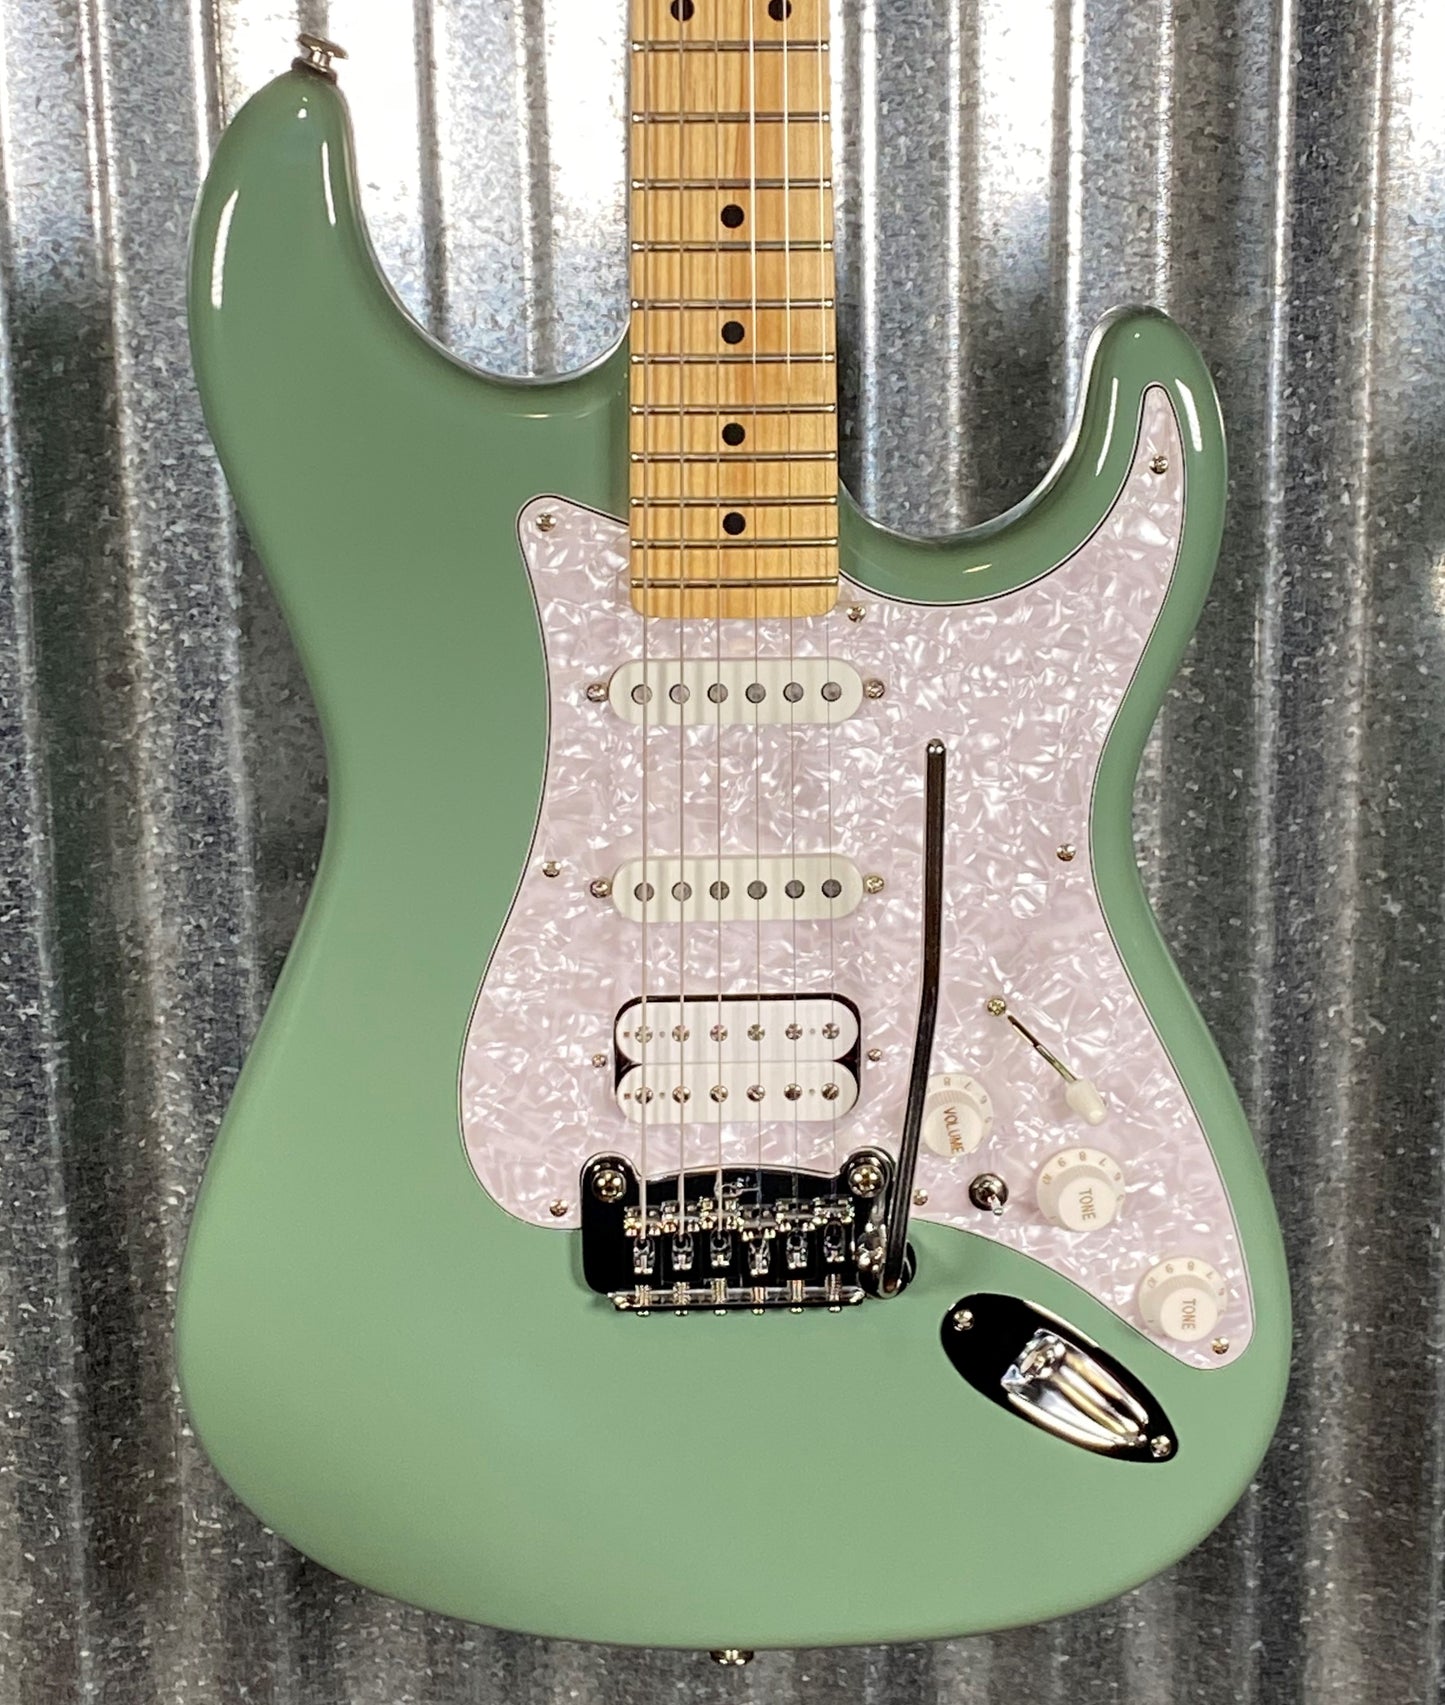 G&L USA 2021 Fullerton Deluxe Legacy HSS 2 Matcha Green Tea Electric Guitar & Bag #1080 Used